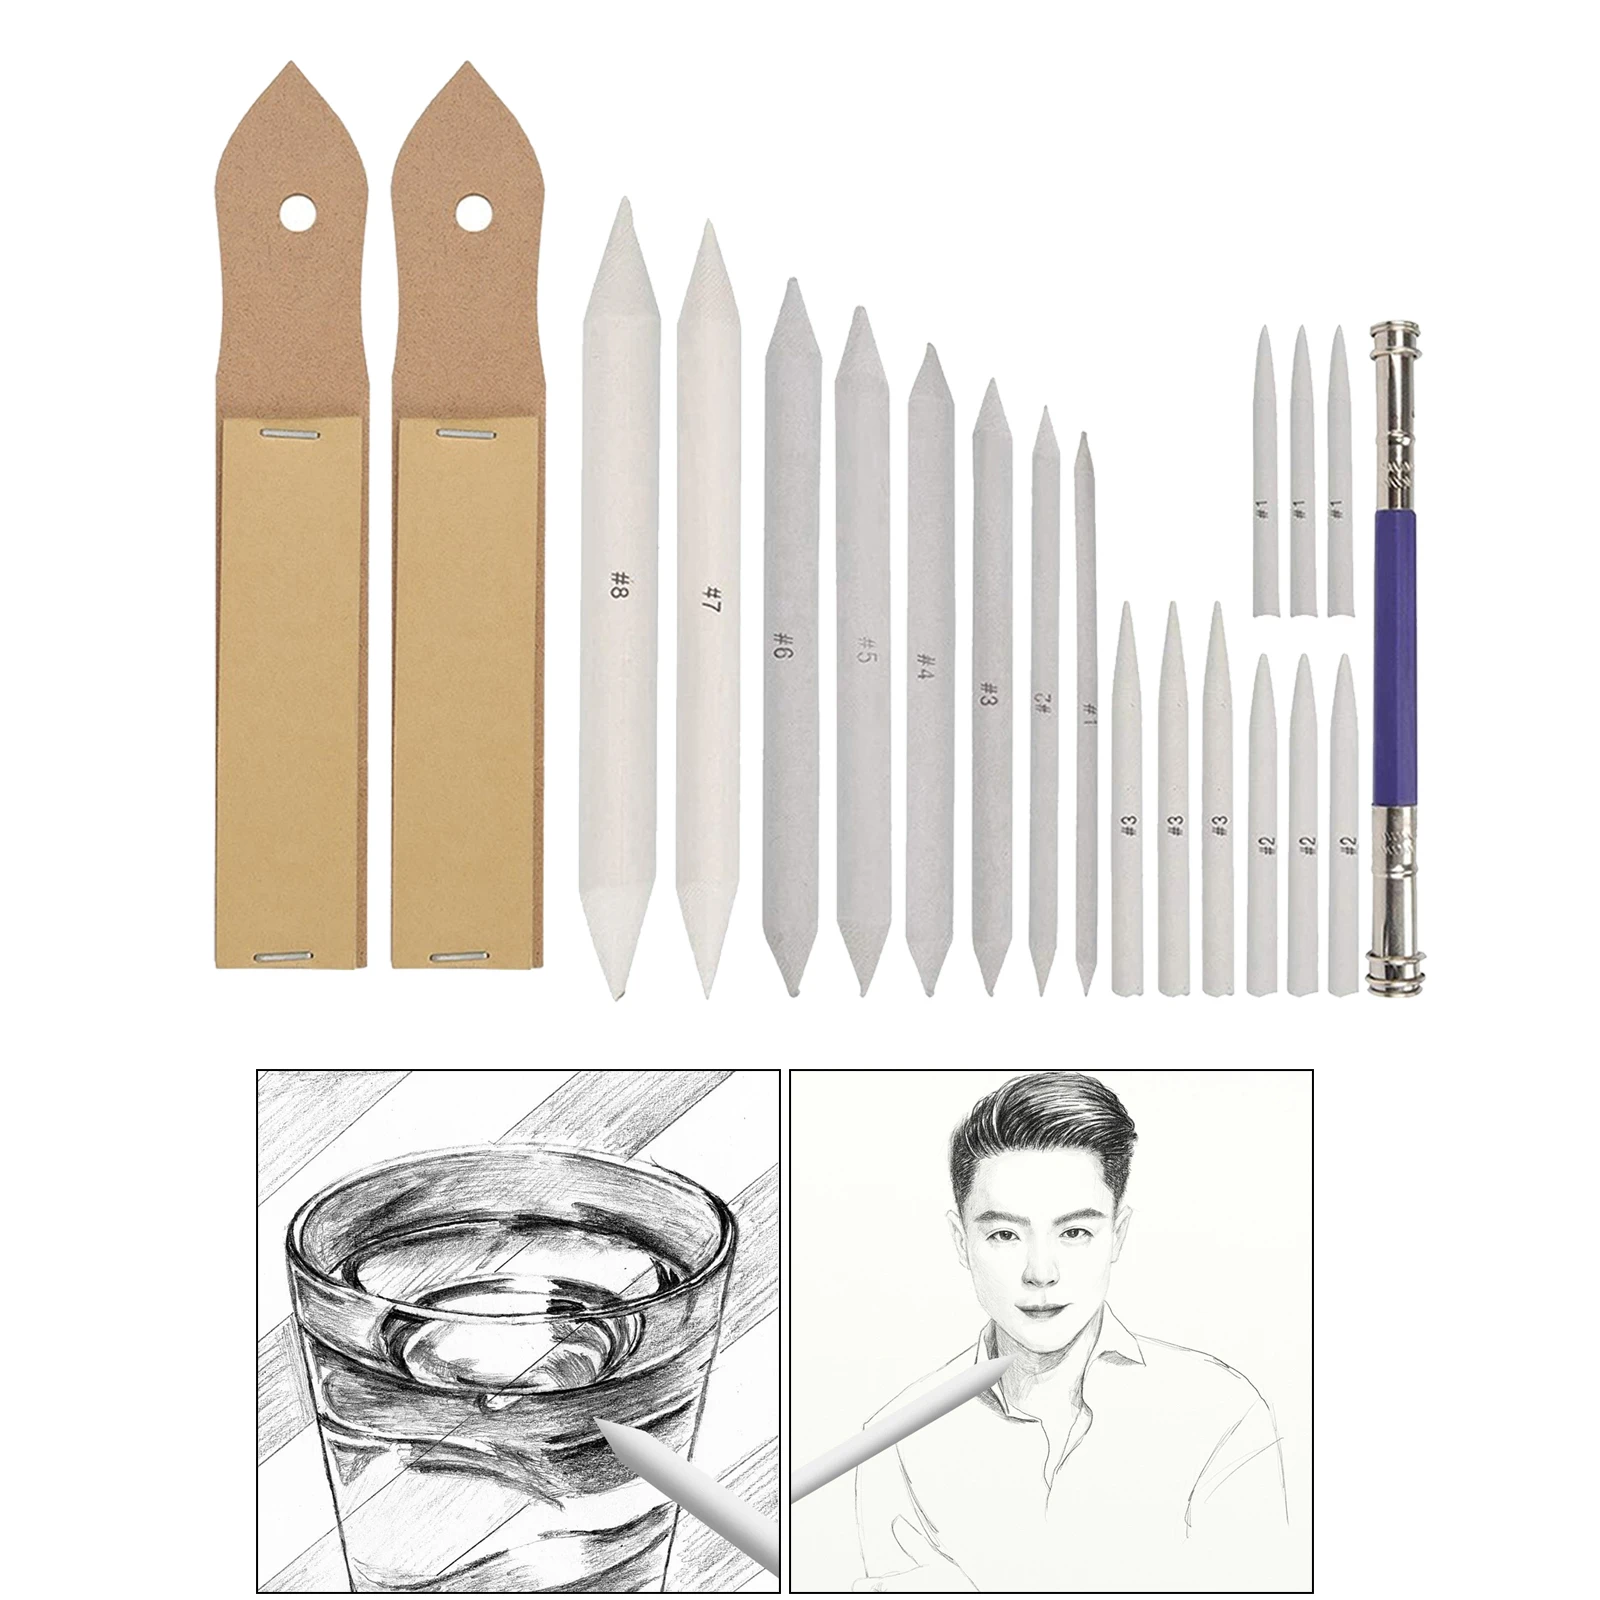 12 Pieces Blending Stumps and Tortillions Set with 2 Pieces Sandpaper Pencil Sharpener for Student Sketch Drawing 